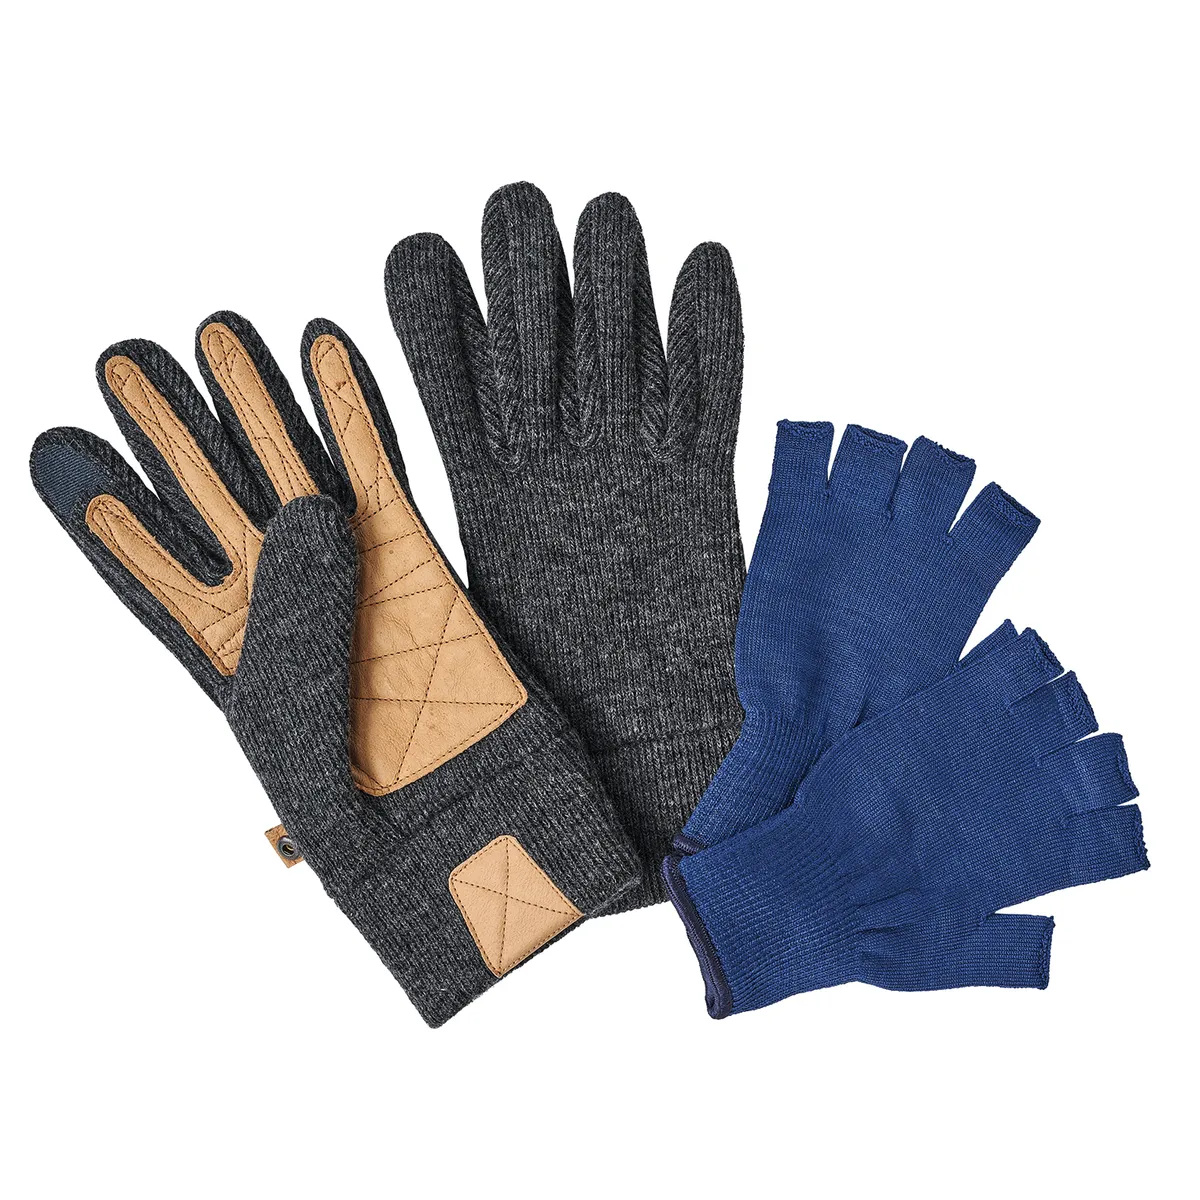 Two pairs of gloves